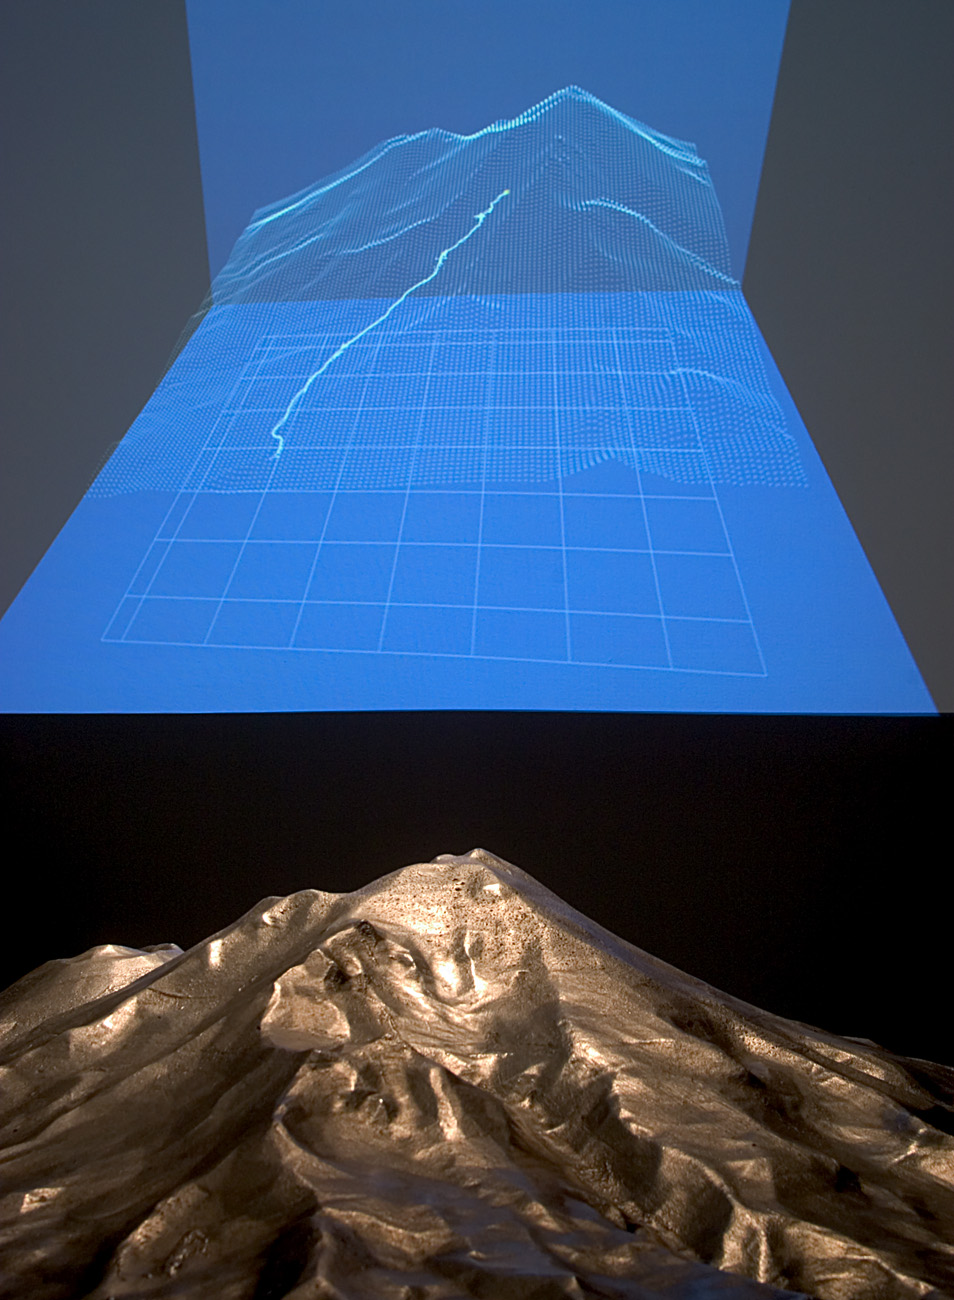 Photograph: close-up of Mt. Shasta scale model.